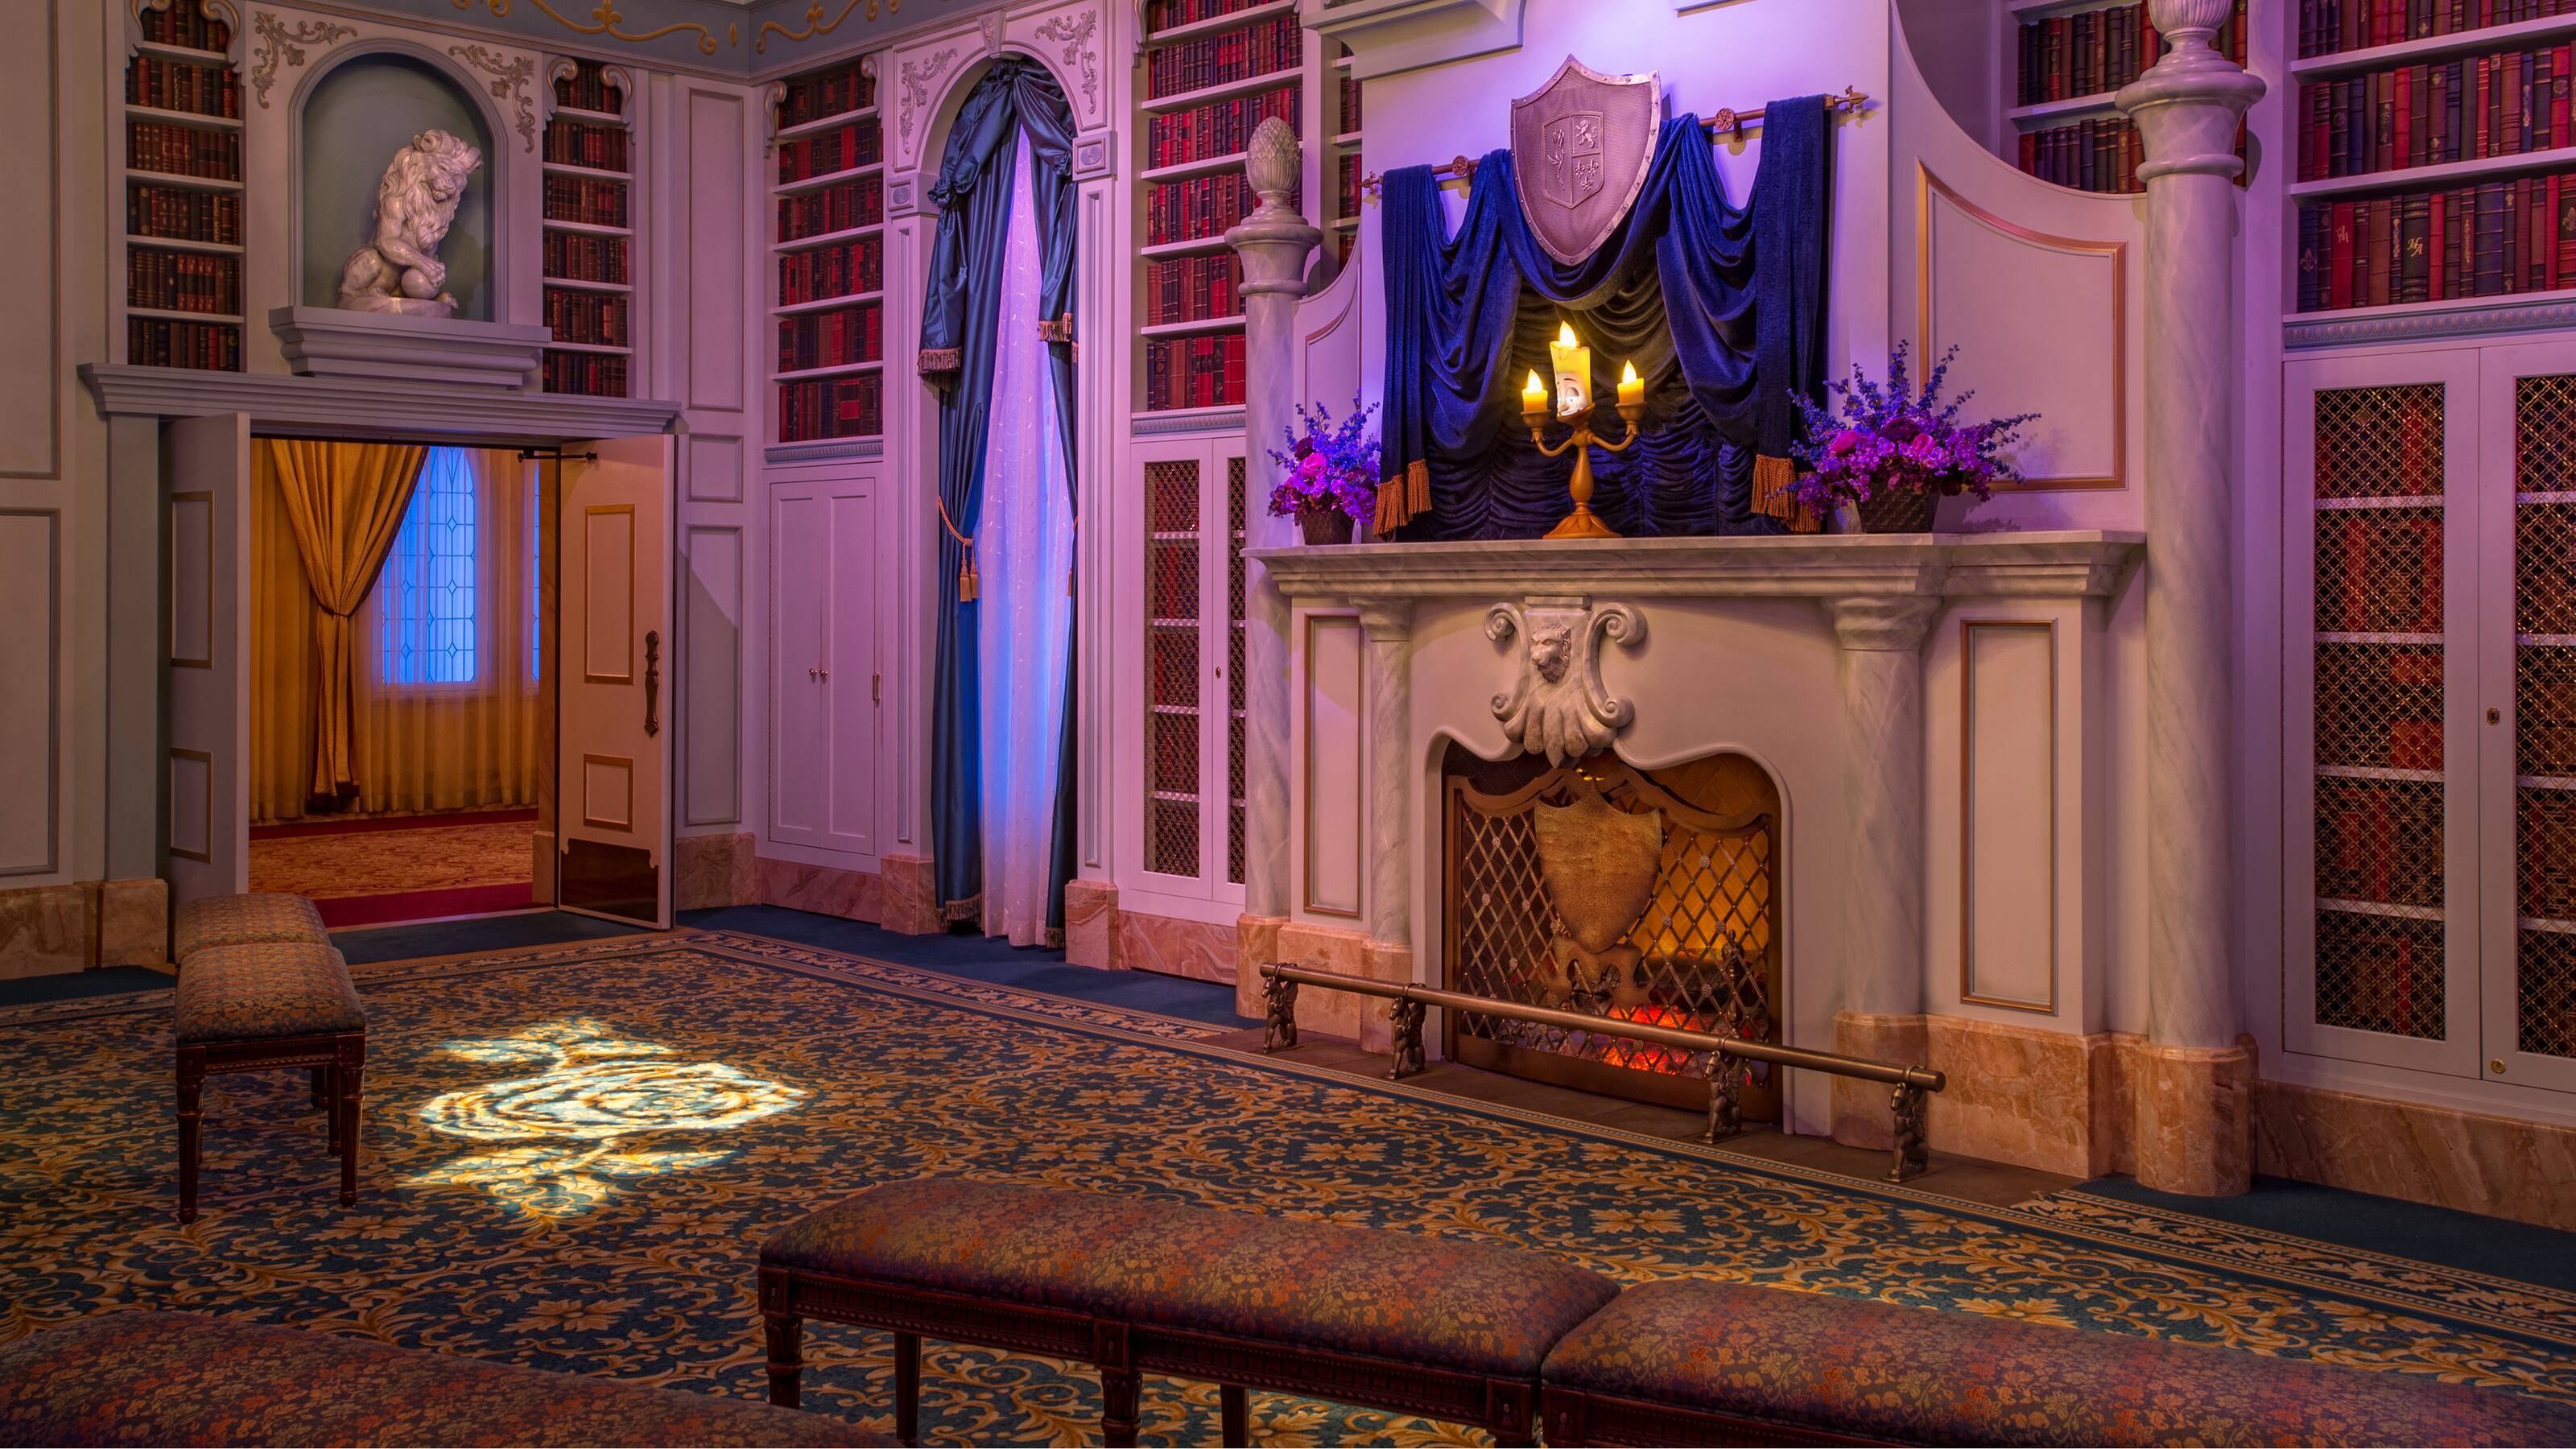 Enchanted Tales with Belle removed from evening Extra Magic Hours line-up at the Magic Kingdom